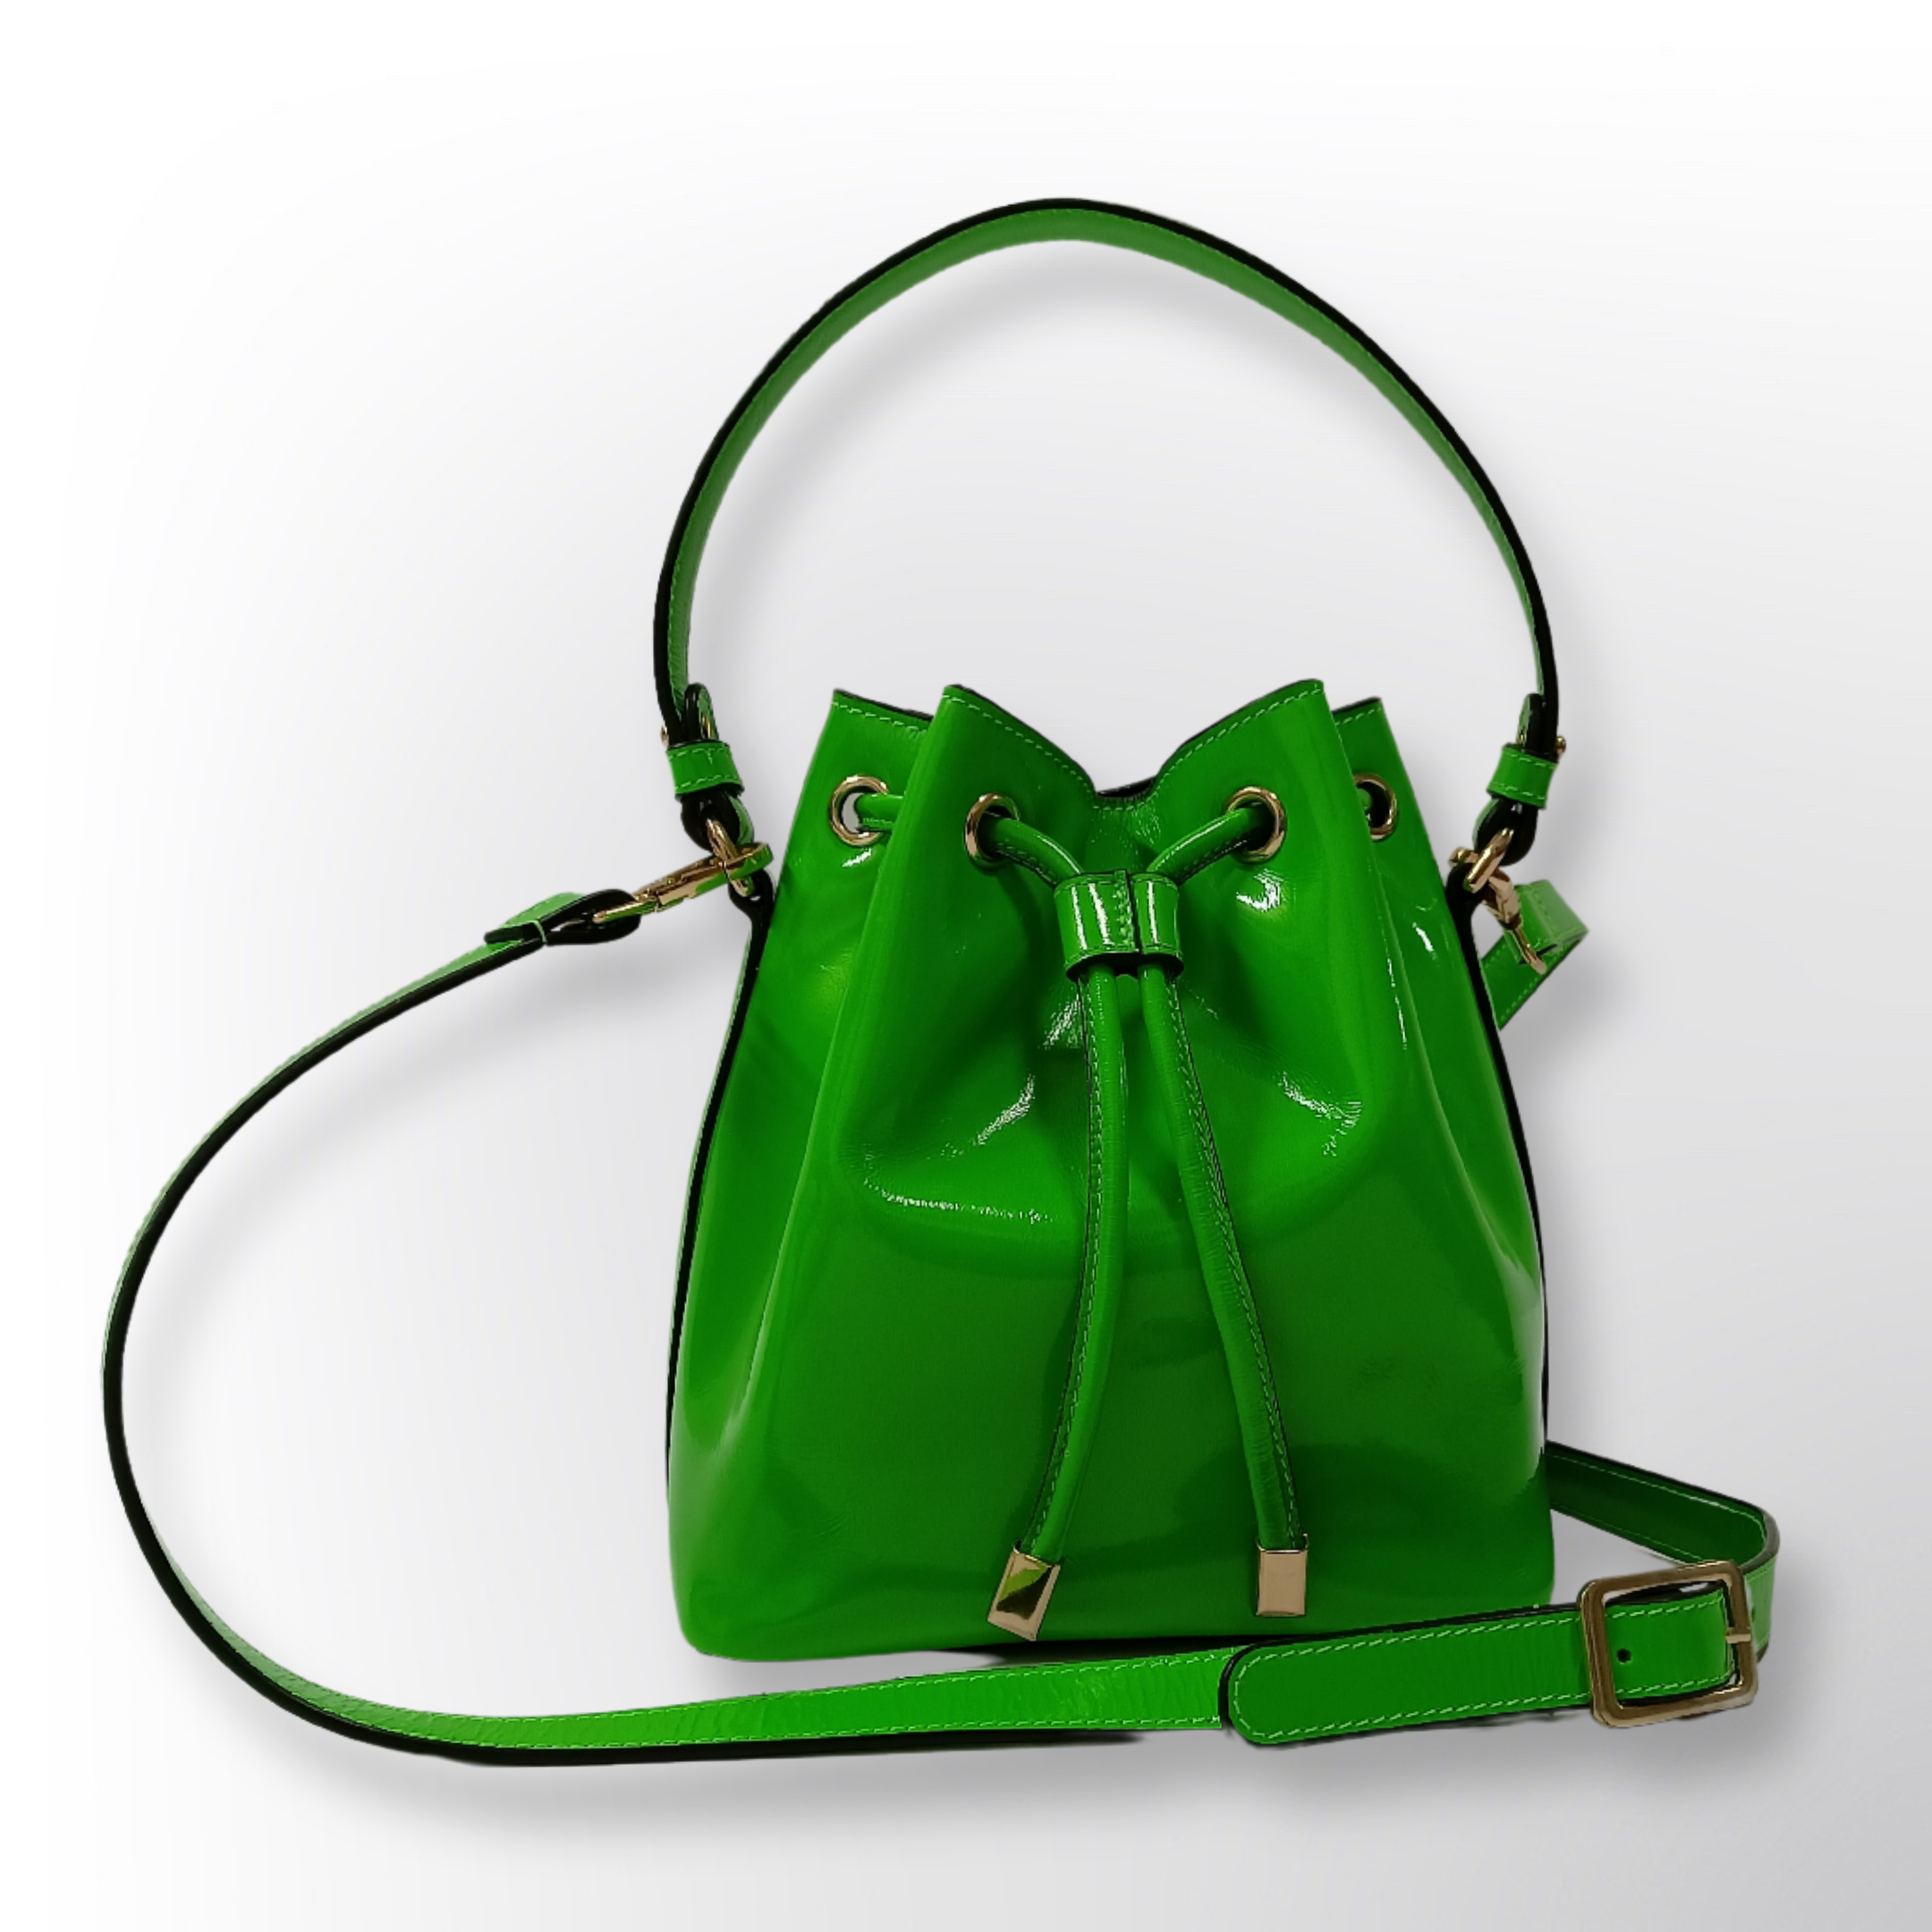 Patent Leather Bucket bag